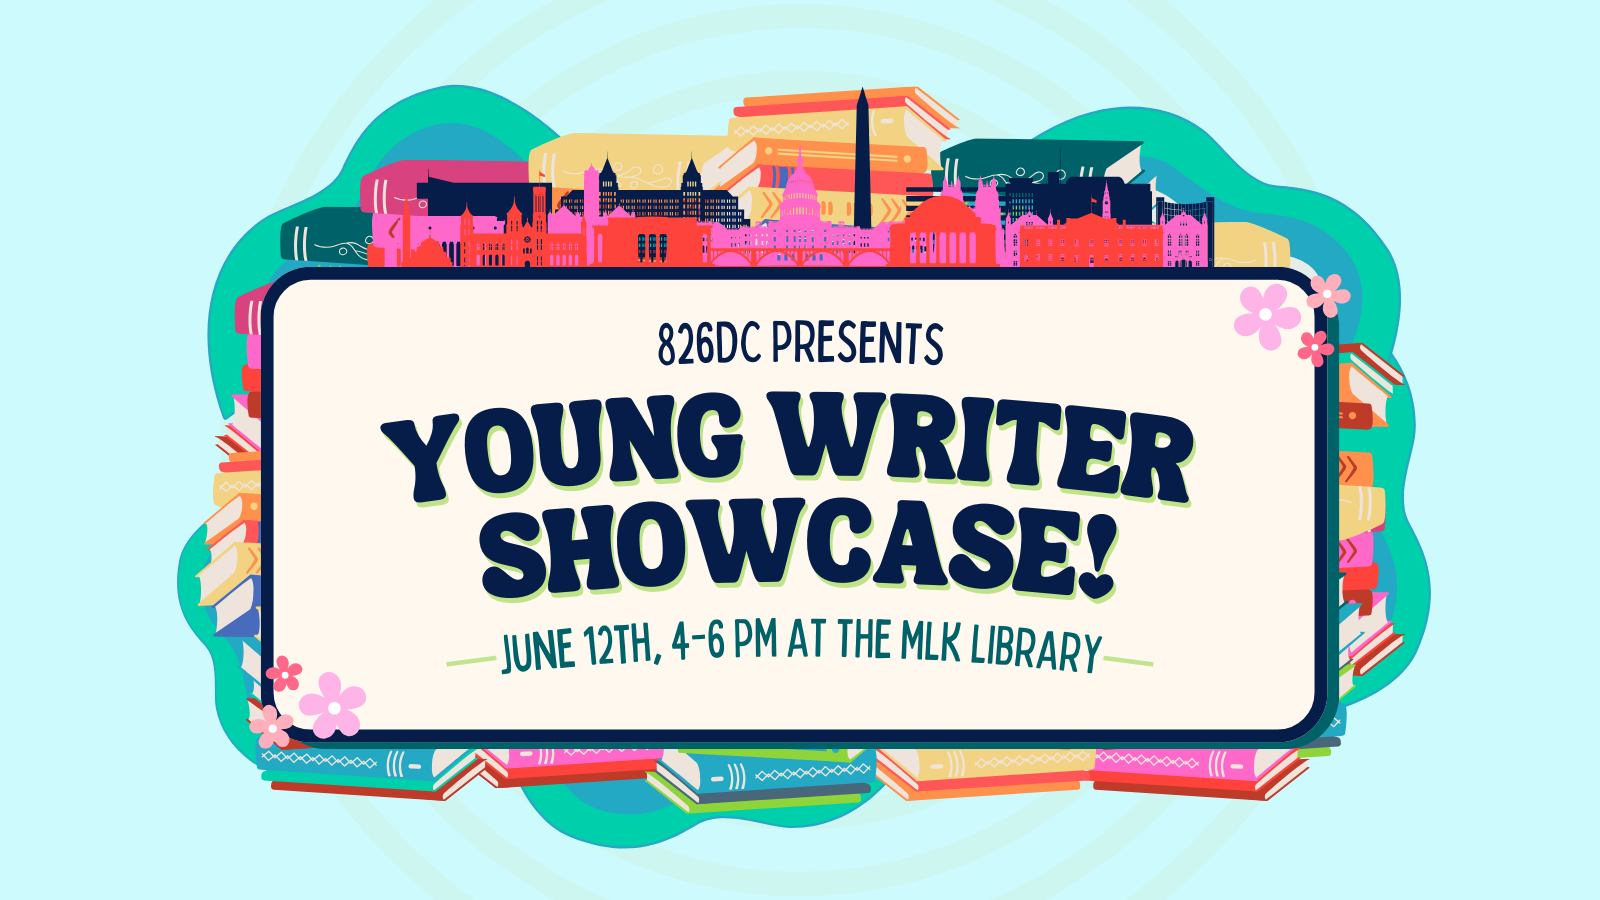 Young Writer Showcase June 12 4-6 PM at MLK Library